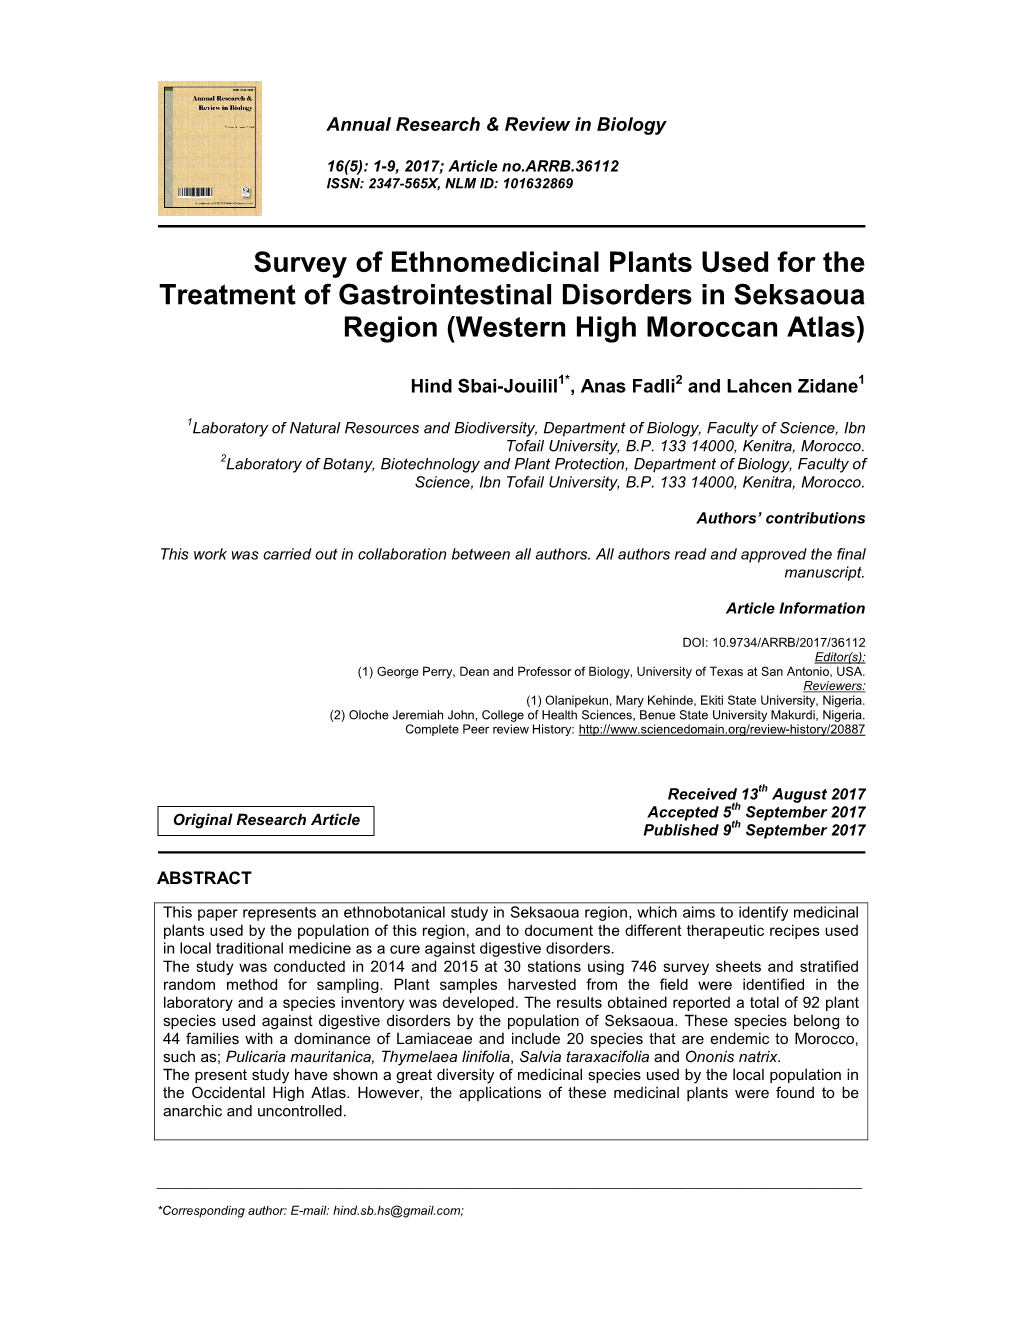 Survey of Ethnomedicinal Plants Used for the Treatment of Gastrointestinal Disorders in Seksaoua Region (Western High Moroccan Atlas)